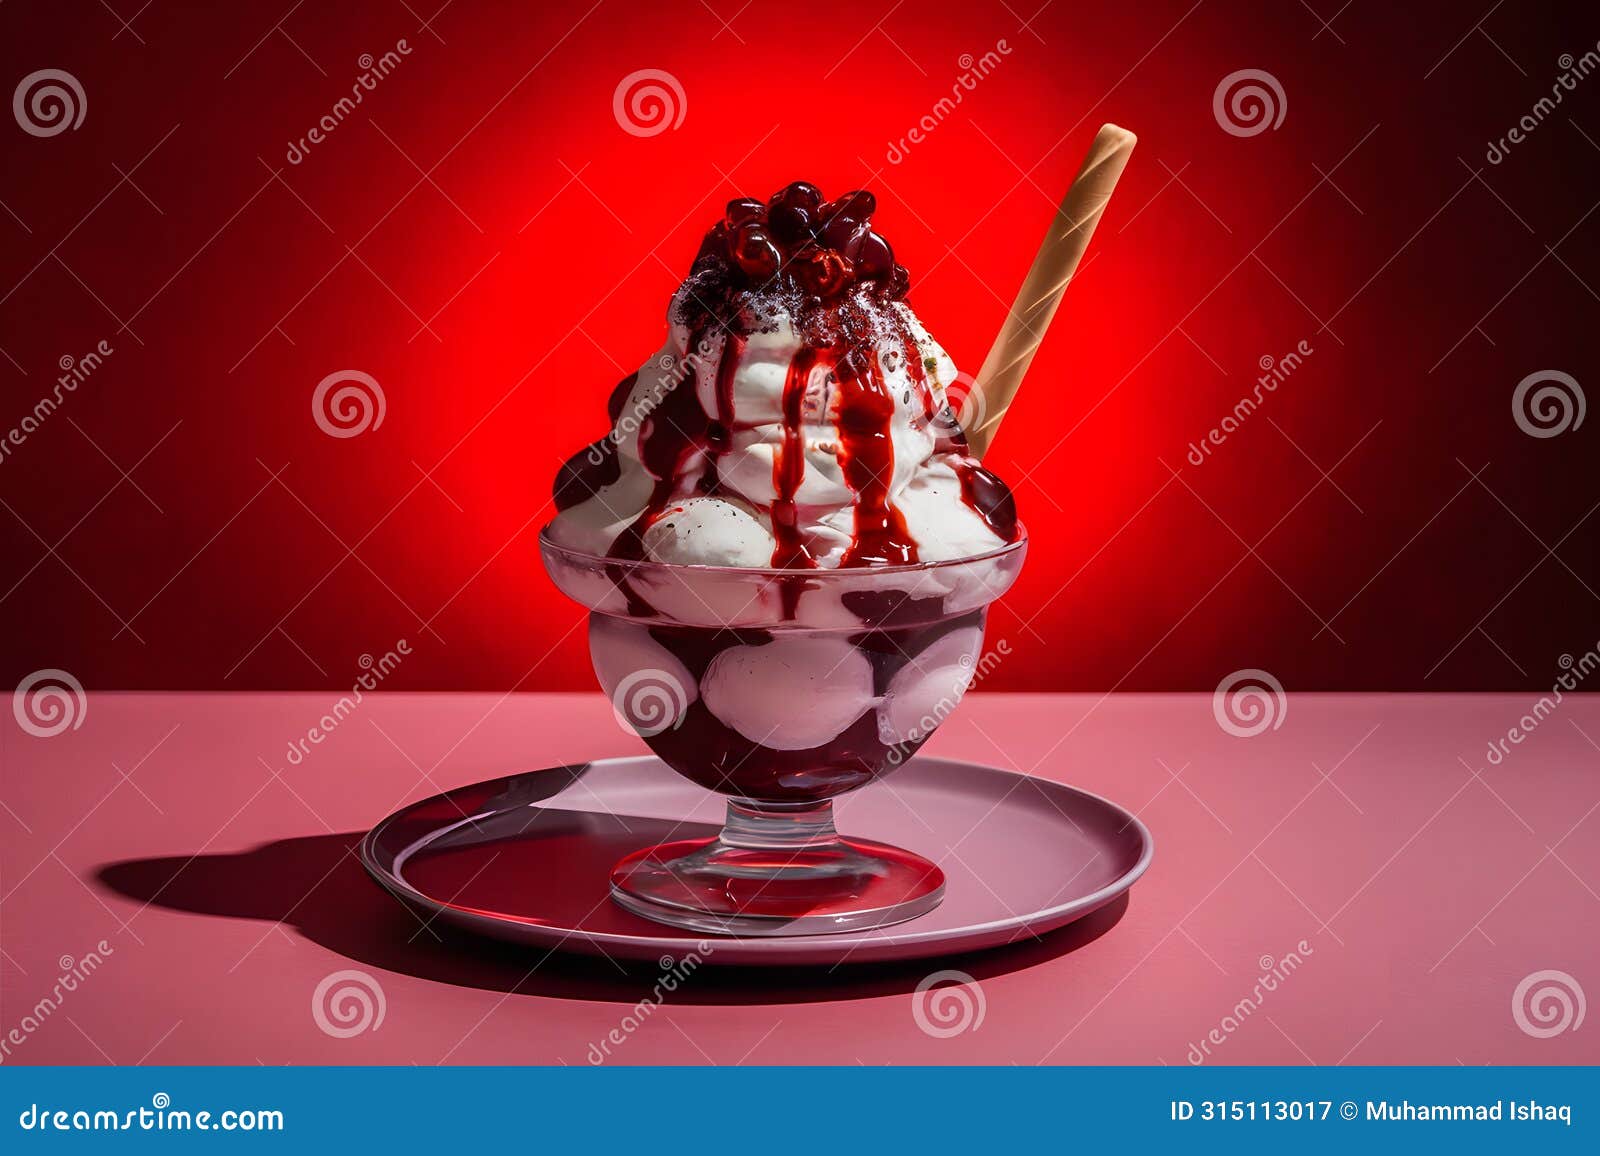 a tempting portrayal of a red light sundae in foodgraphy